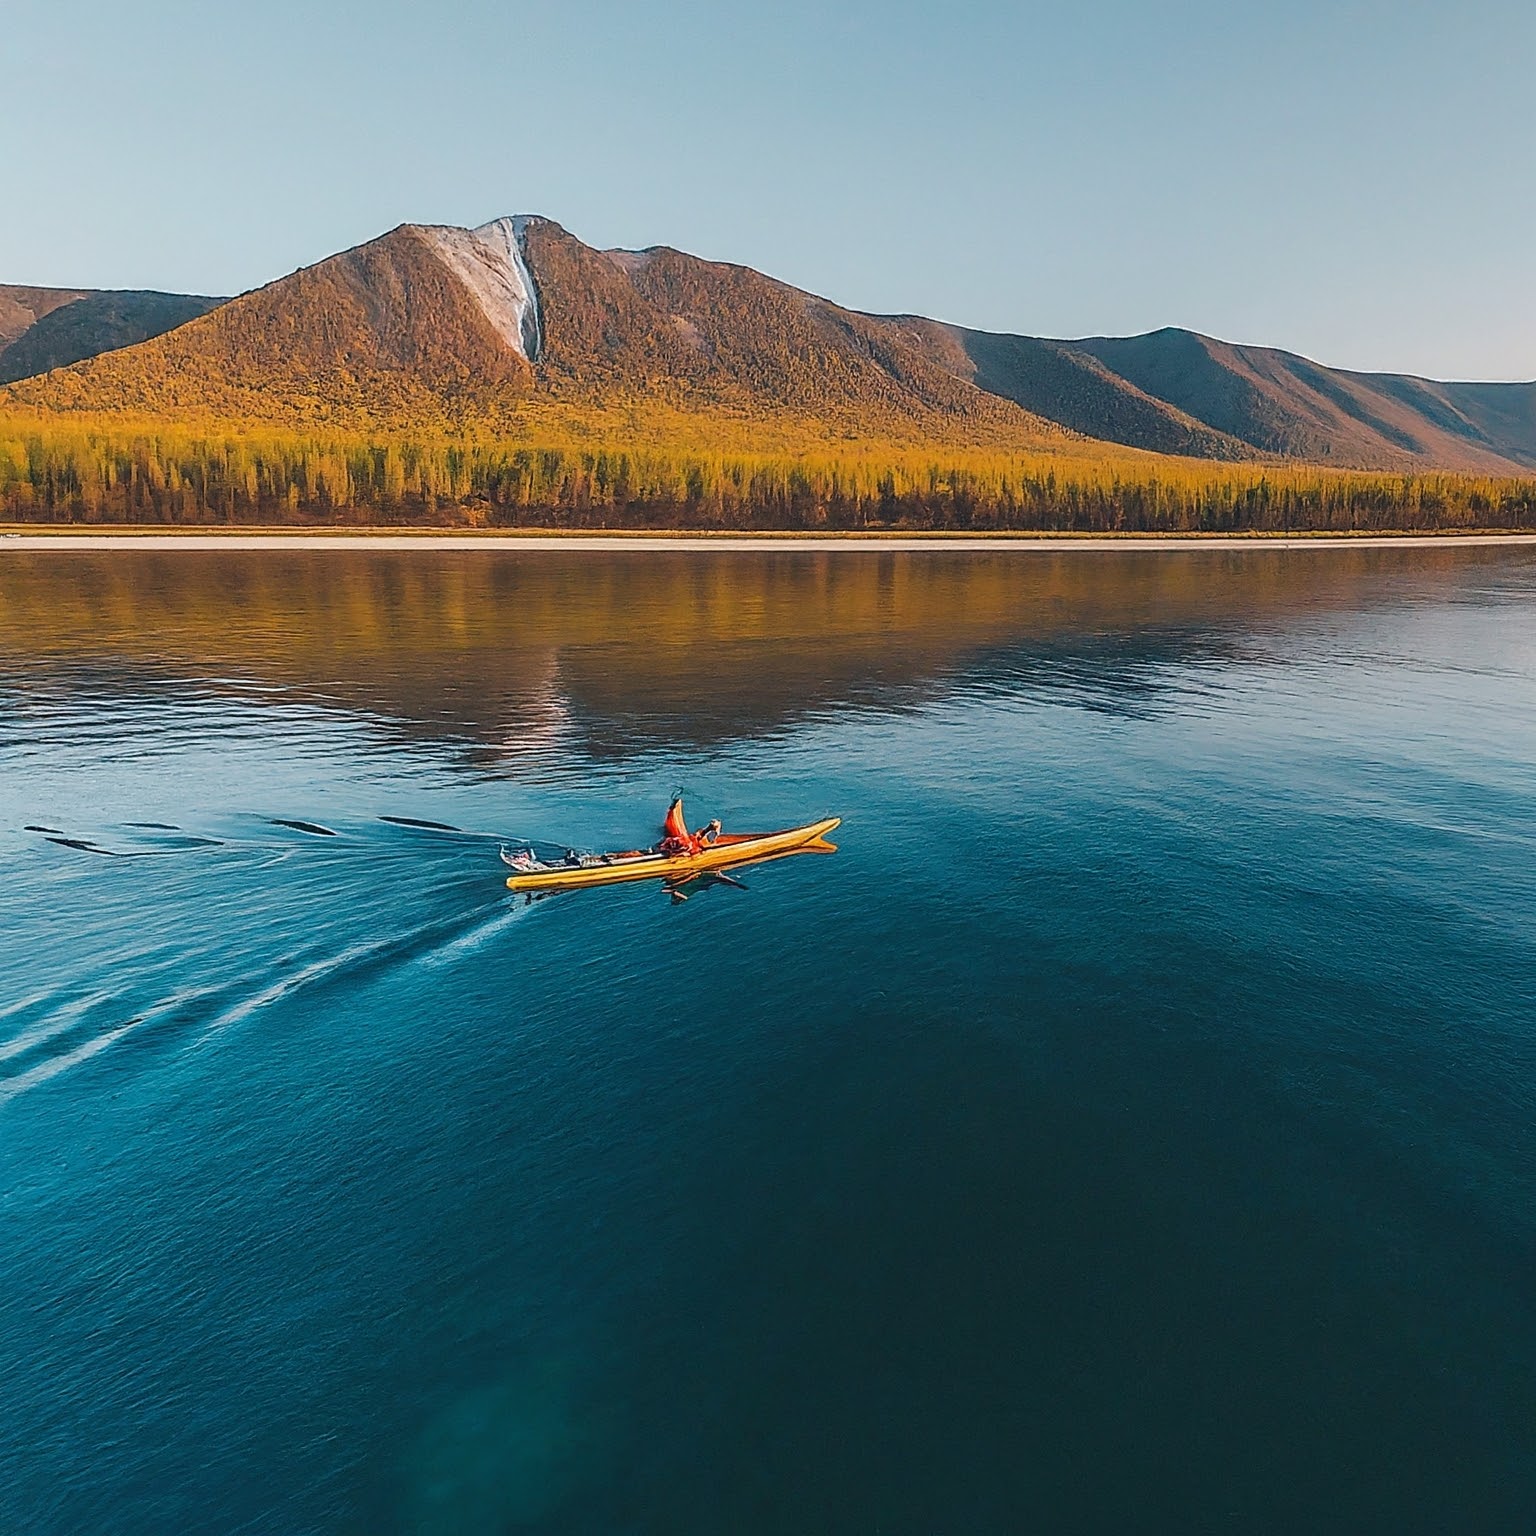 Kayaker exploring the clear waters of Lake Baikal, Russia, with mountains and forests in the background.